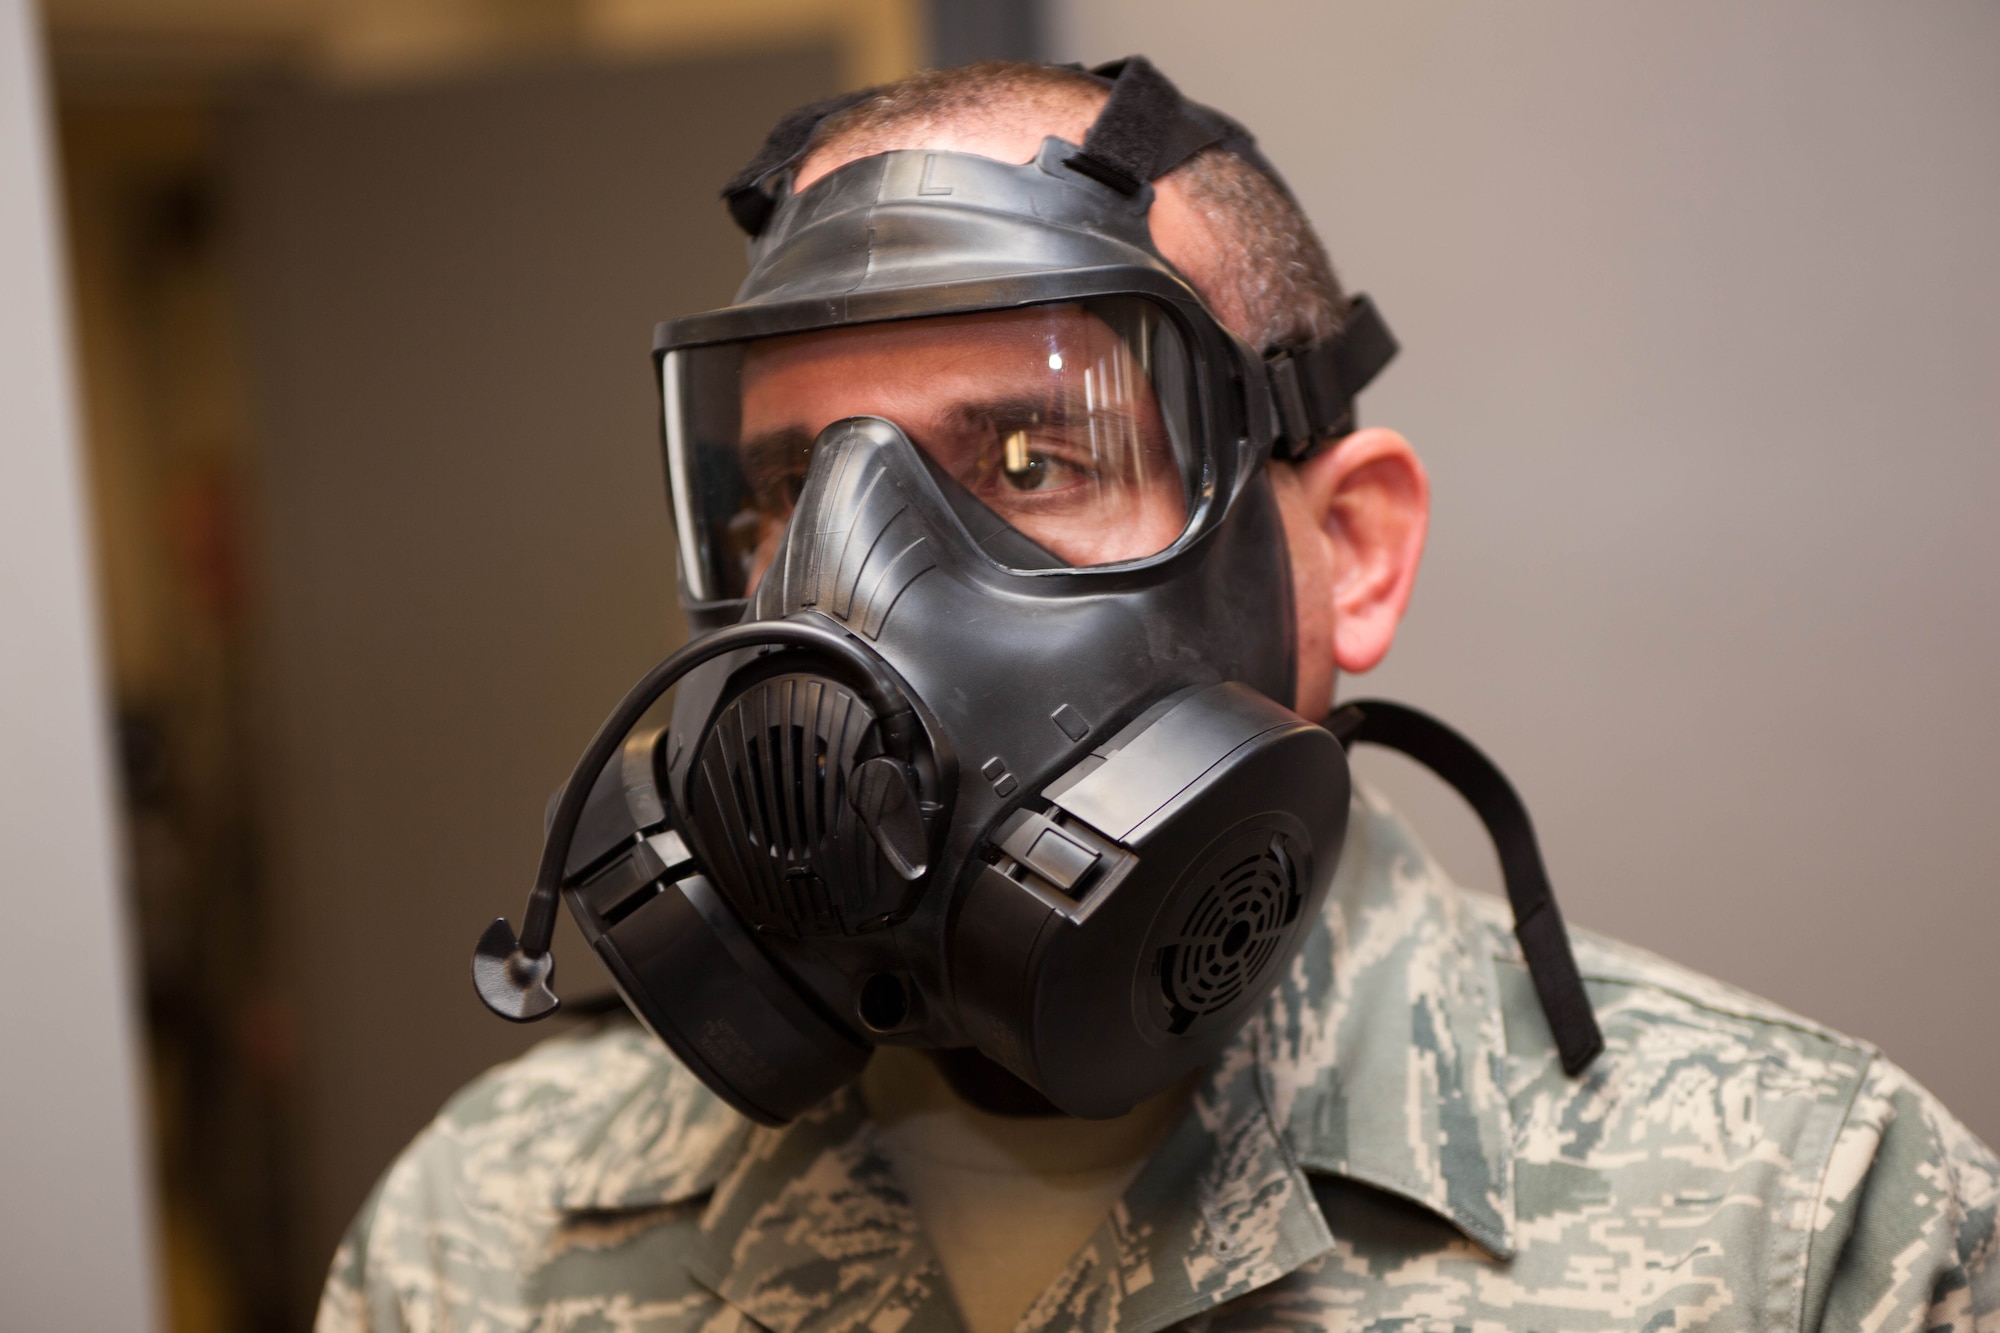 A1C Joel Cruzmarcano prepares to take a gas mask fit test. The D.C.  Air National Guard is replacing all MCU-2 A/P gas masks with the new M50 gas mask. The new M50 gas mask has twin conformal filters, which allow 50 percent improvement in breathing resistance, and allows for over 24 hours of protection against chemical or biological agents and radioactive particulate matter. (U.S. Air Force Photo by Tech Sgt. Gareth Buckland)